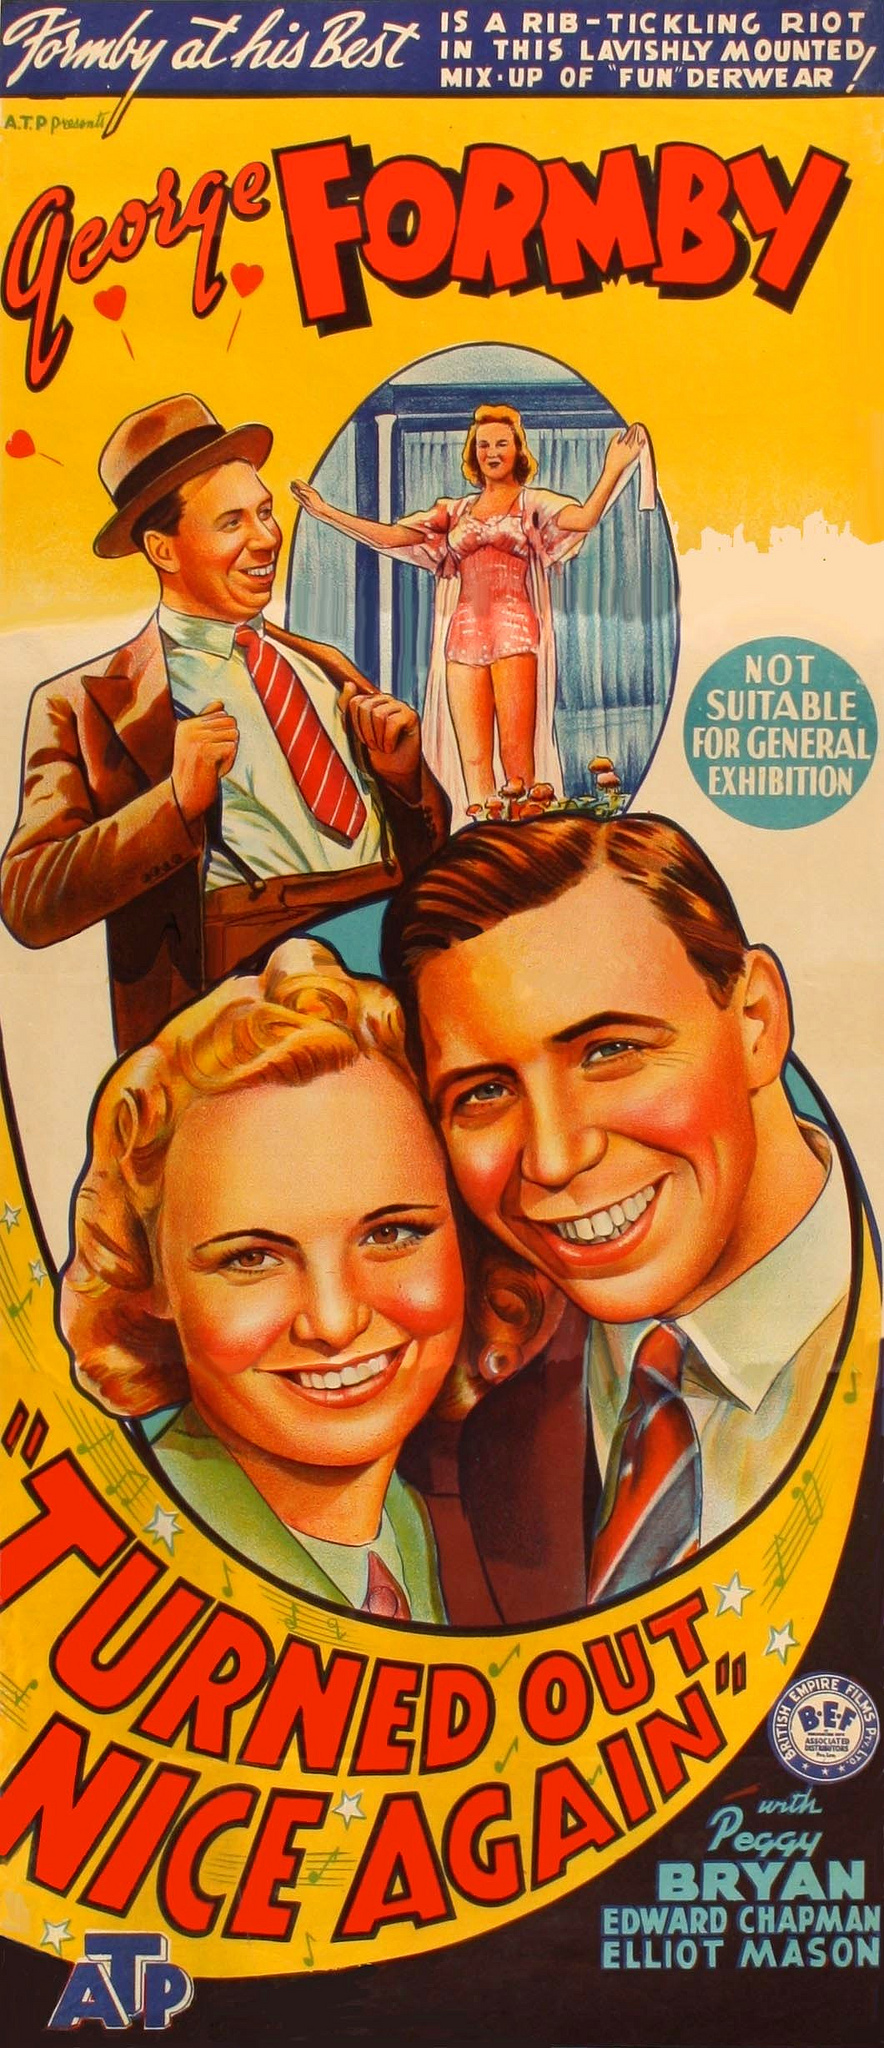 Turned Out Nice Again (1941) | Amazing Movie Posters